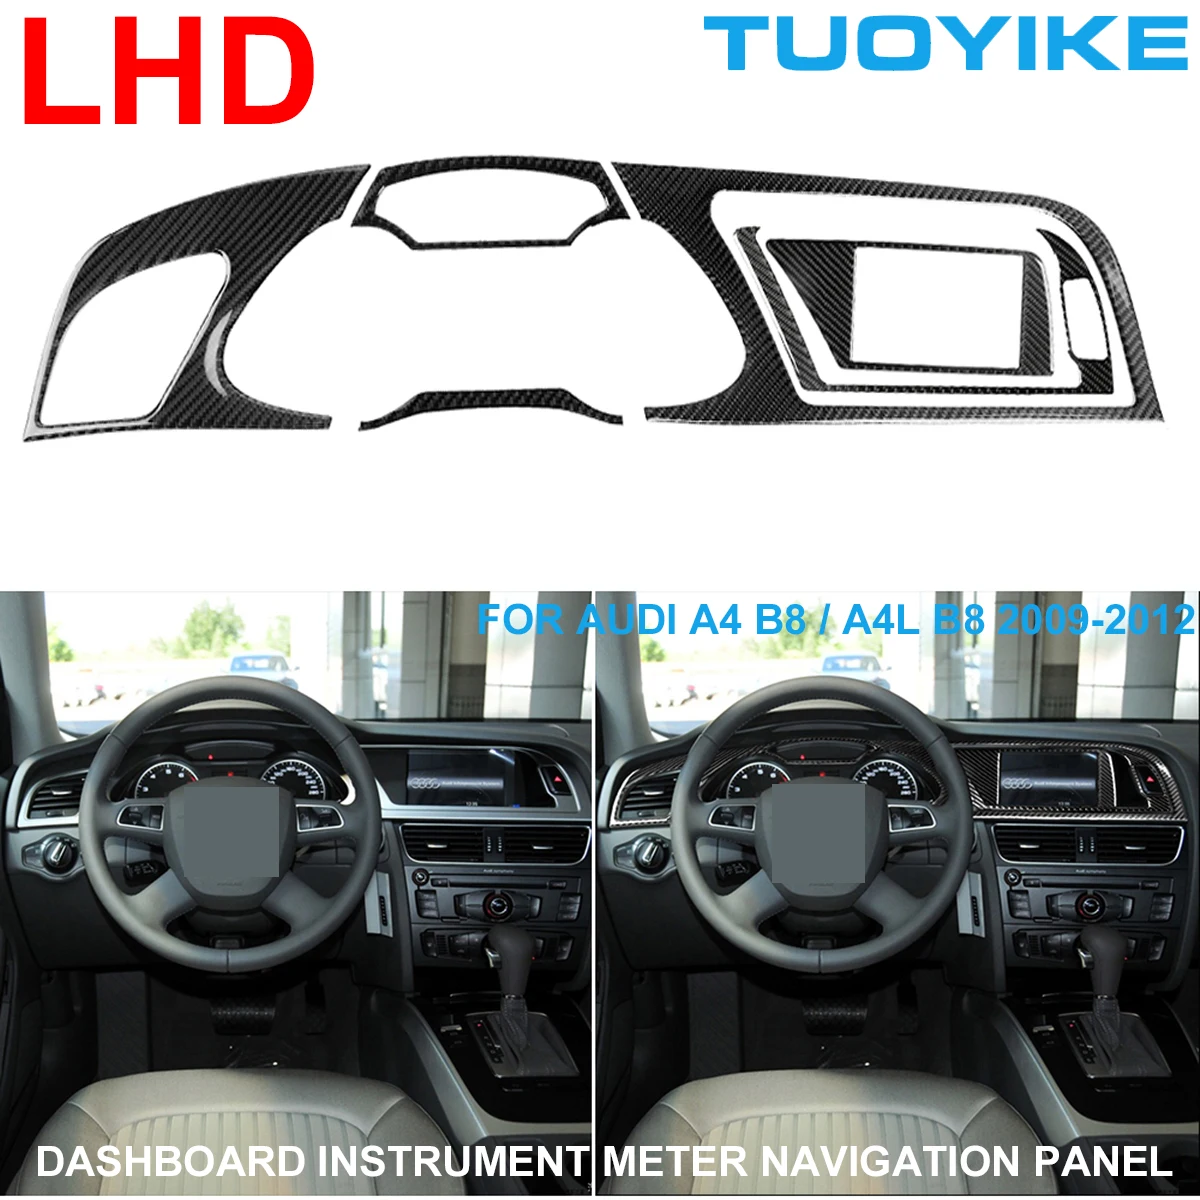 

LHD RHD Car Styling Real Carbon Fiber Dashboard Console Central Instrument Panel Sticker Trim Cover For Audi A4 A4L B8 2009-2012